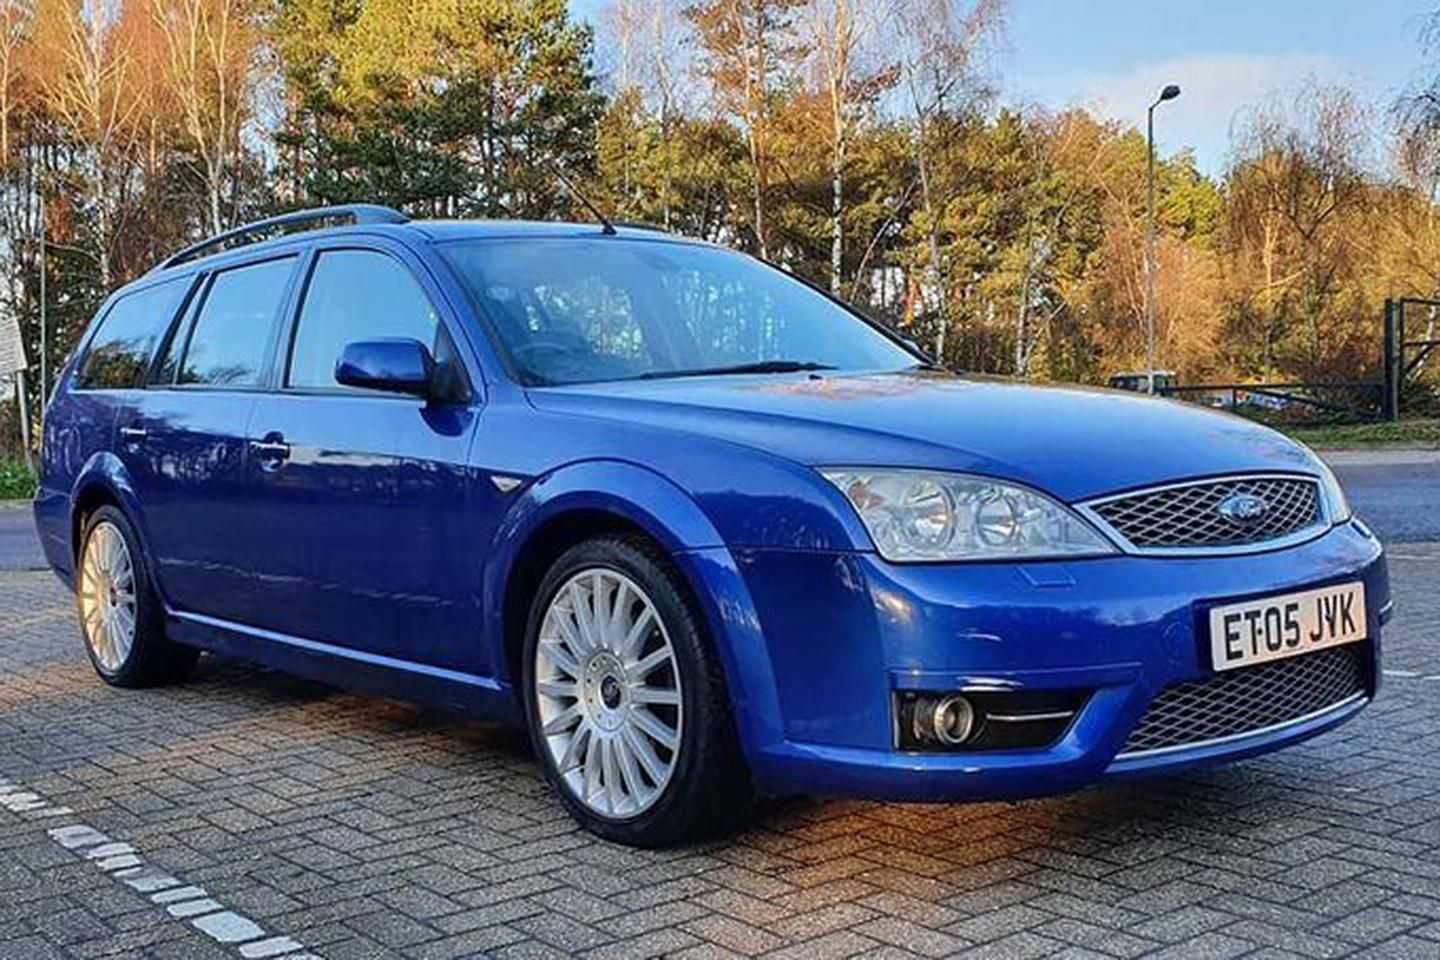 Mondeo tdci. Ford Mondeo 3 St. Ford Mondeo mk3. Ford Mondeo st220. Ford Mondeo 3 st220.